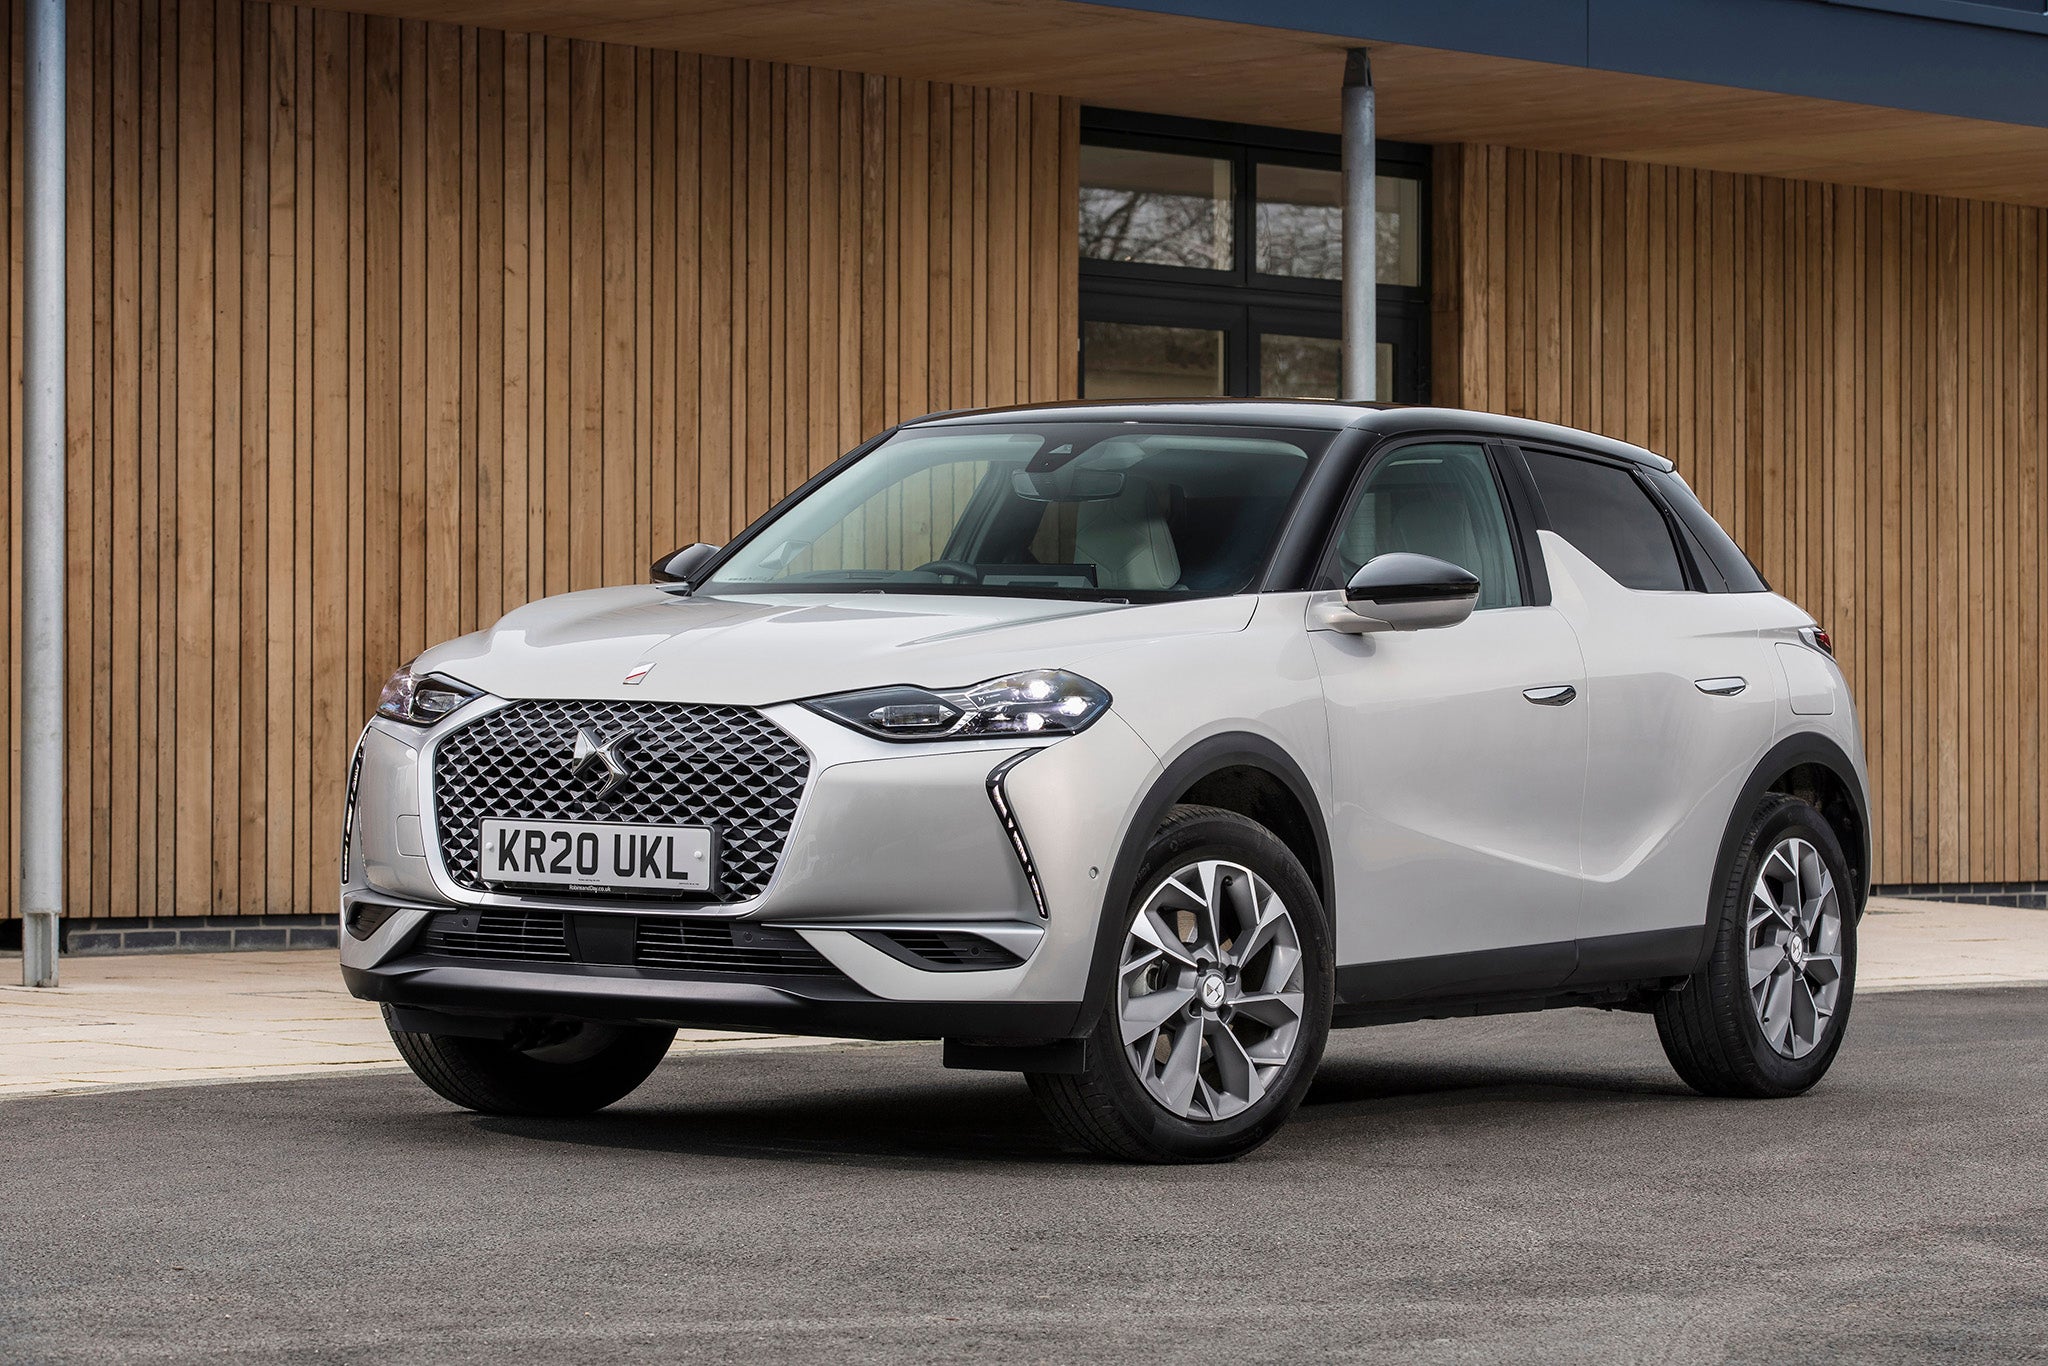 Car review: DS 3 Crossback, the familiar looking old friend with a